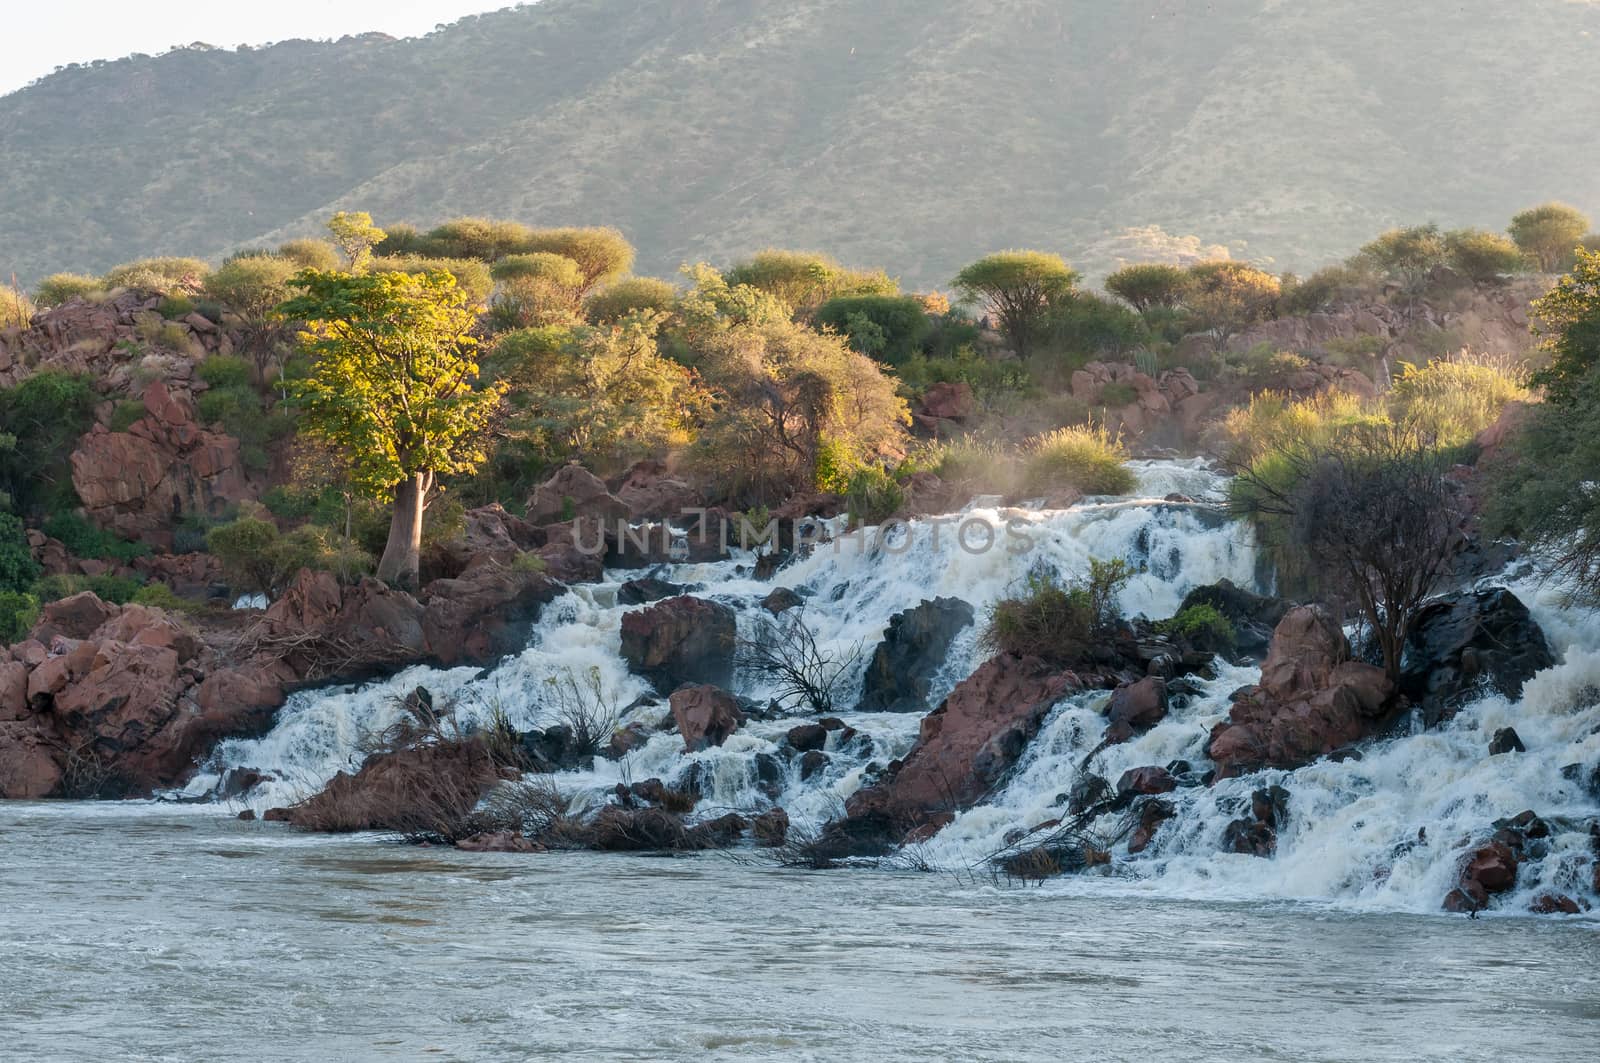 Part of the Epupa waterfalls in the Kunene River. A baobab tree is visible